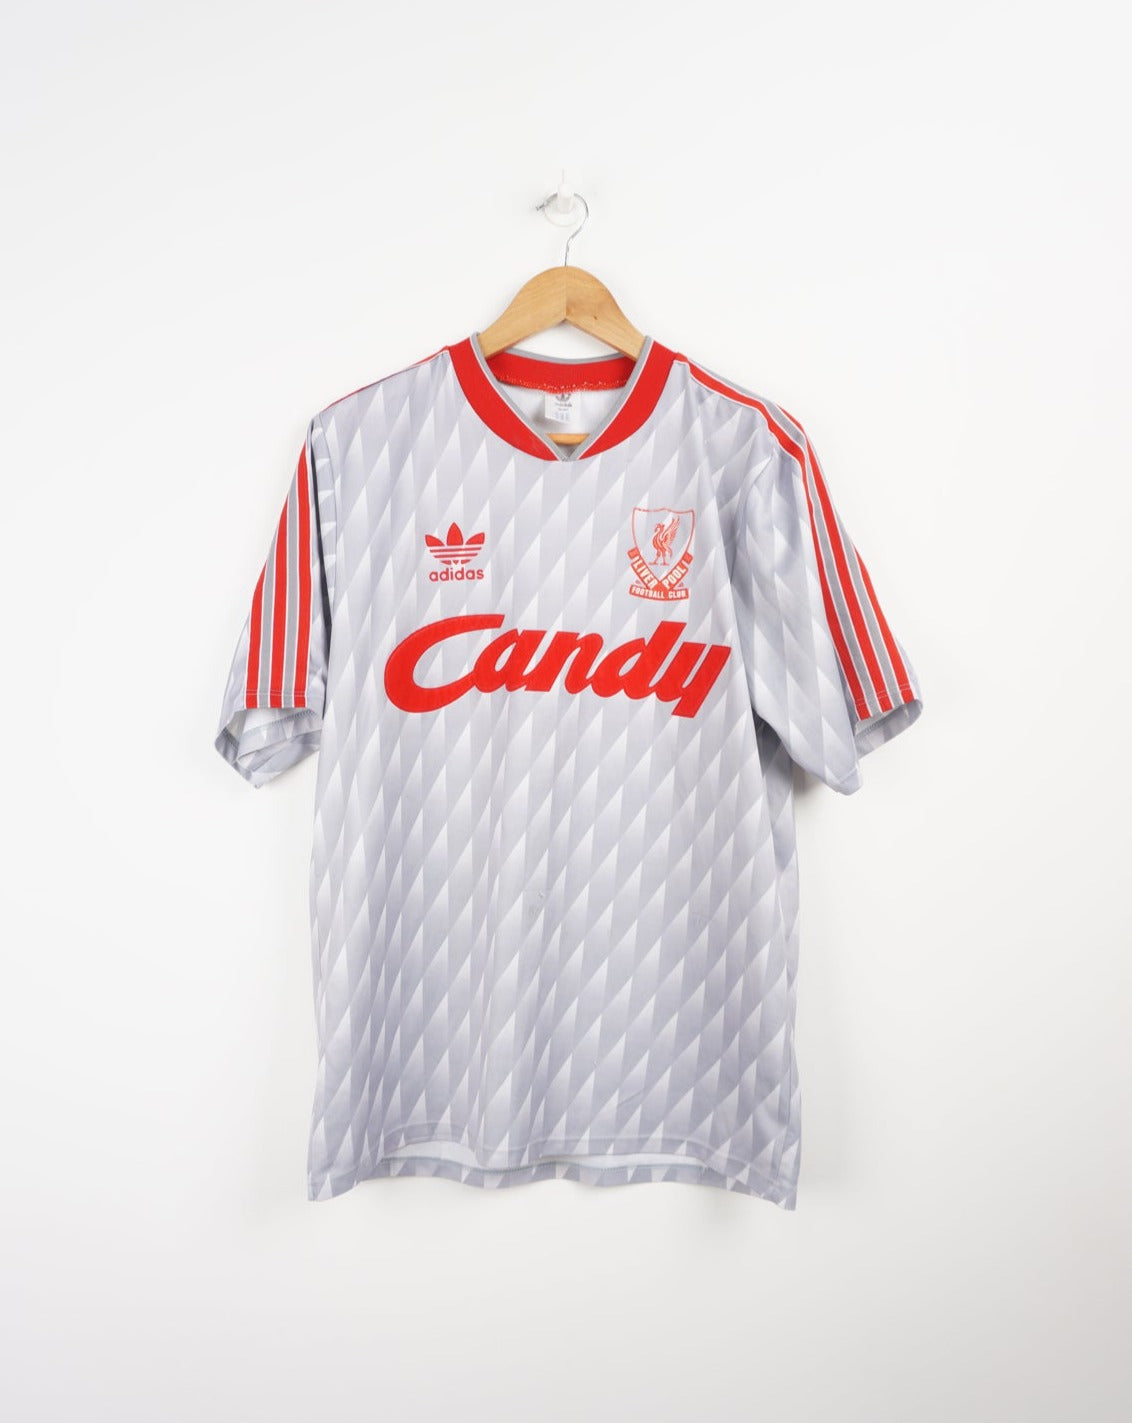 liverpool candy jersey